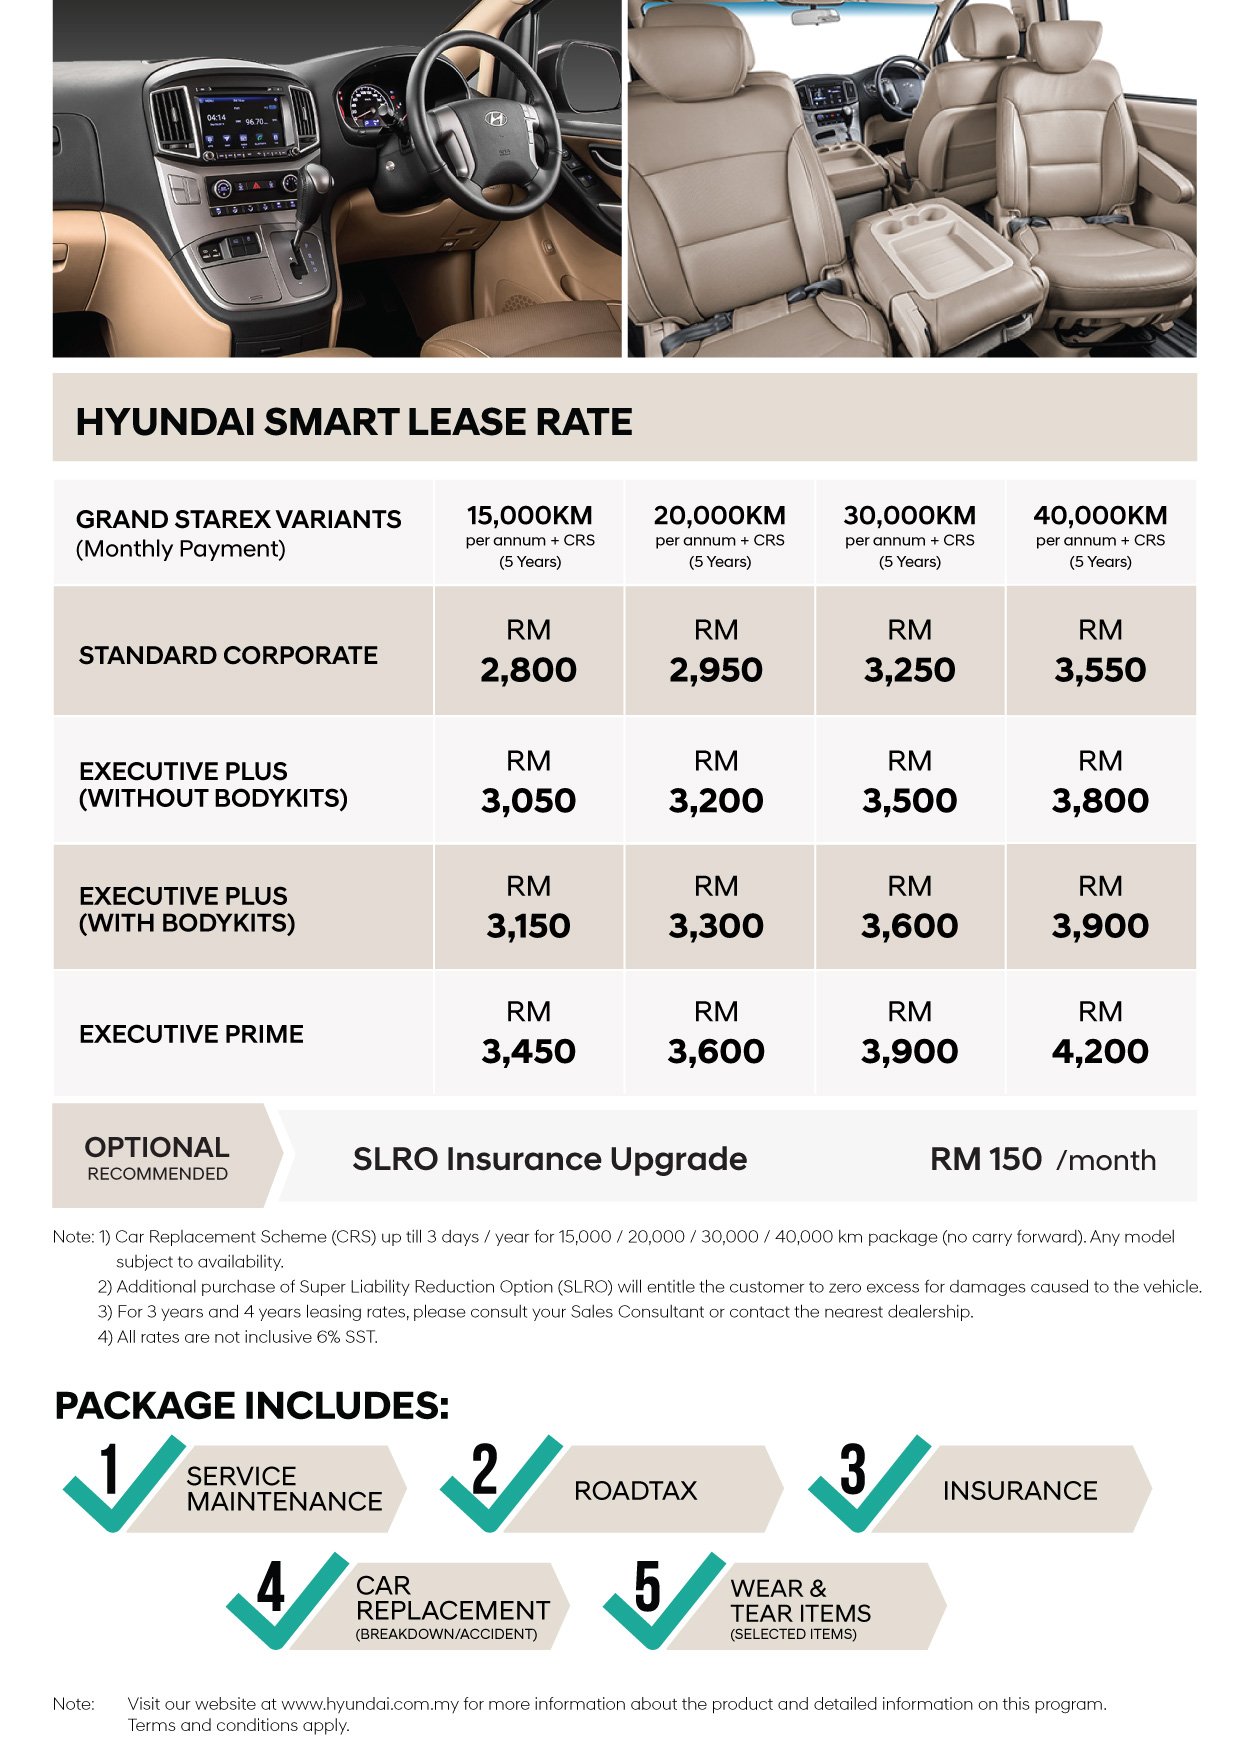 Hyundai Smart Lease - Grand Starex | Drive with peace of mind. In Collaboration with Sime Darby Rent a Car (Hertz International Licensee)